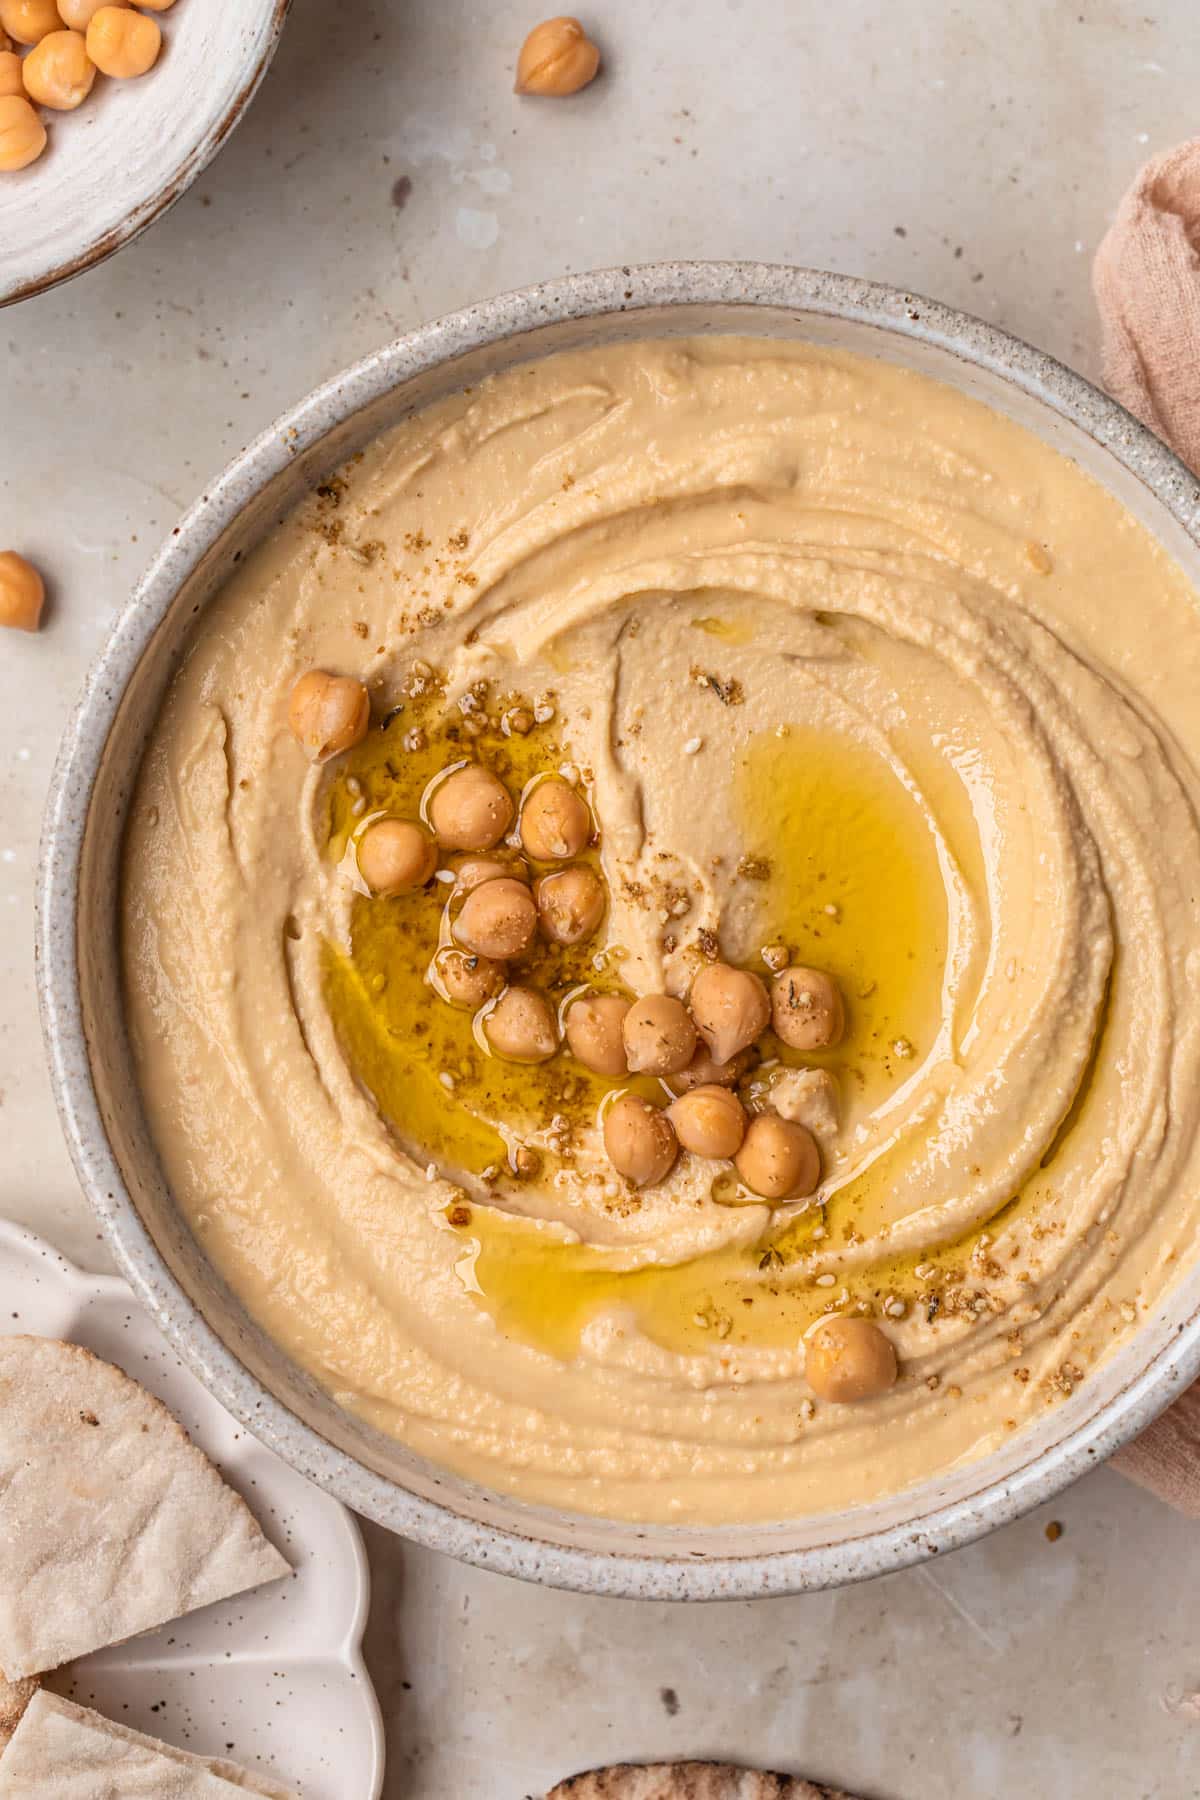 Creamy hummus in a ceramic bowl, topped with a drizzle of olive oil, chickpeas and dukkah.